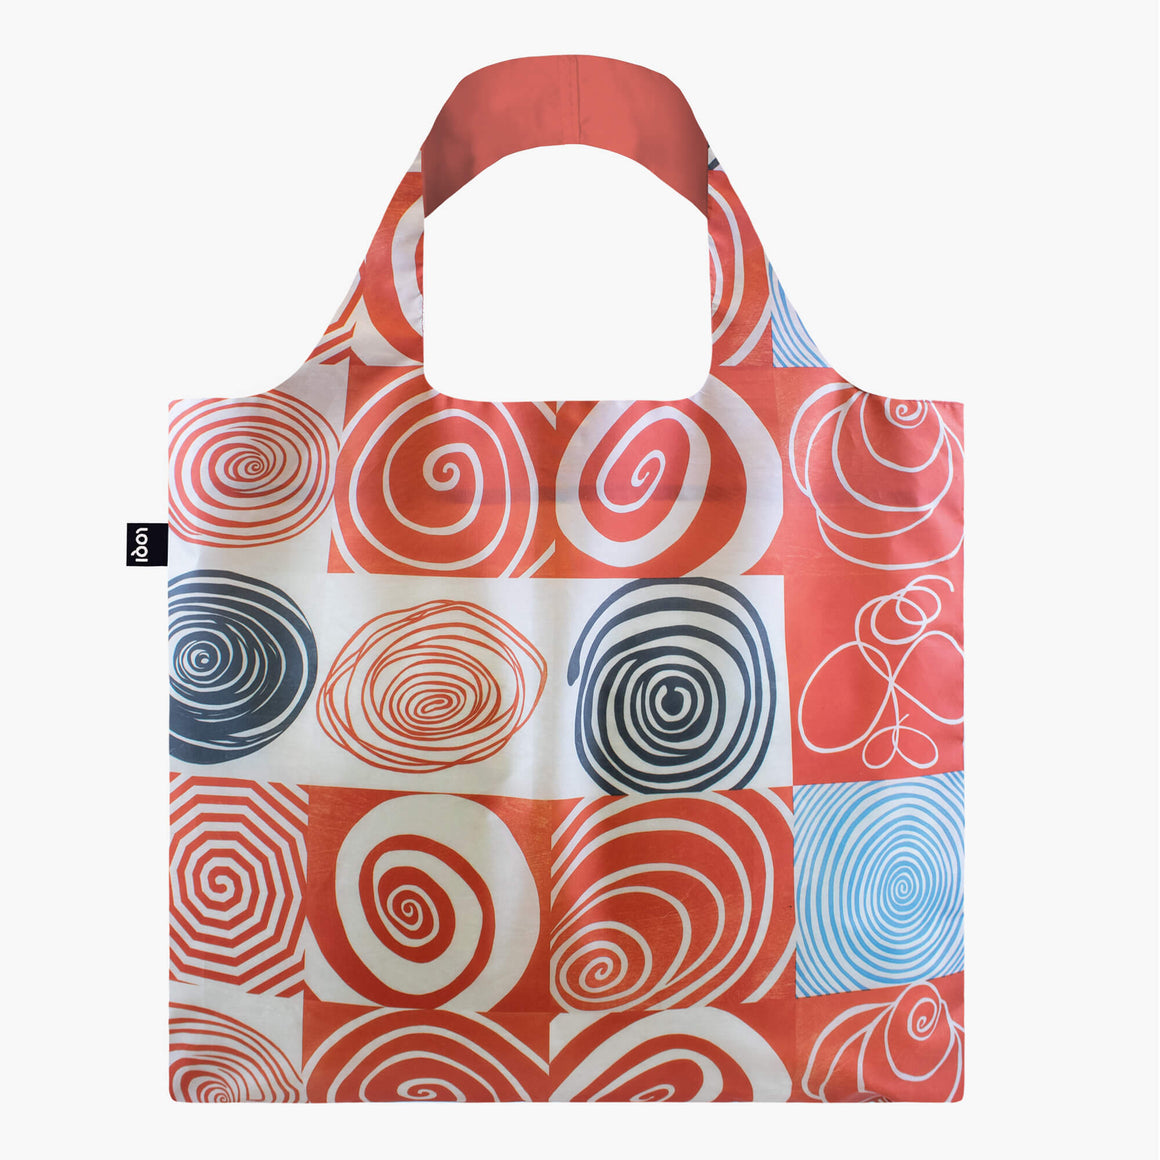 Tote Bag - LOUISE BOURGEOIS Spirals Grids